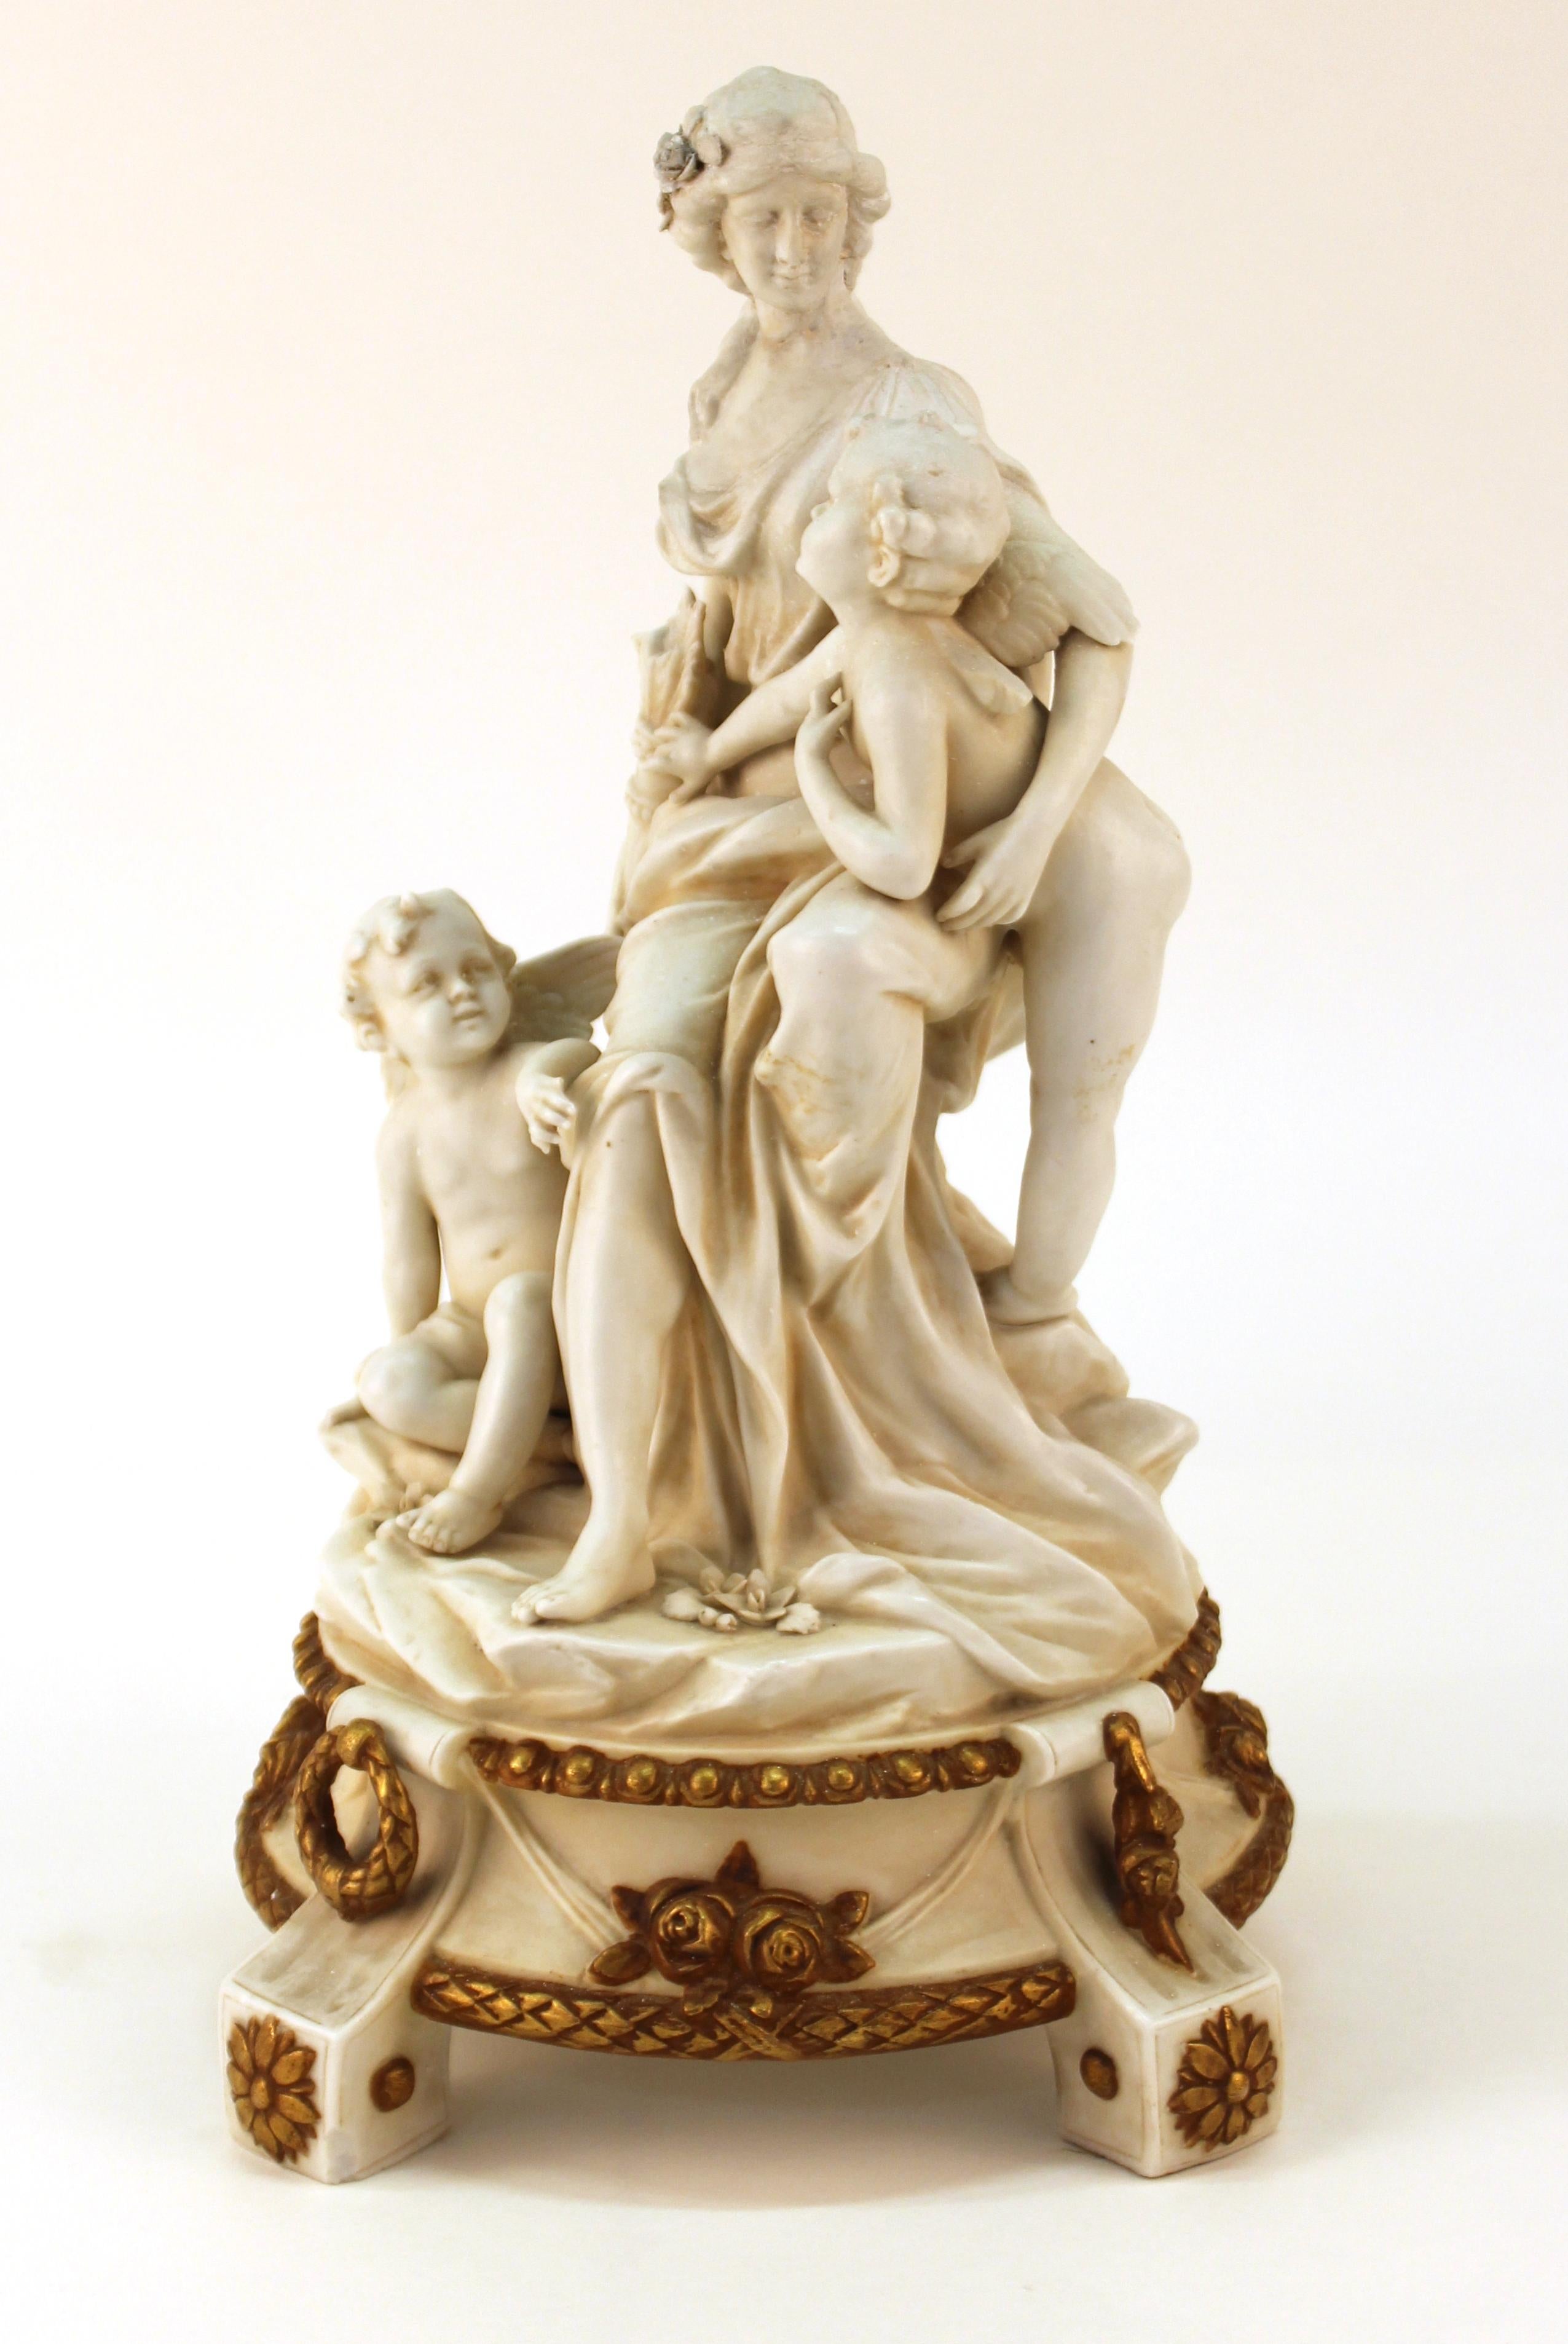 Parianware figurine, probably 19th century, of a seated Venus with two cherubs, the goddess teasingly holding one's quiver of arrows out of reach. The piece has a circular base with gilt-painted ring handles, rosettes, roses, and laurel leaf edges.